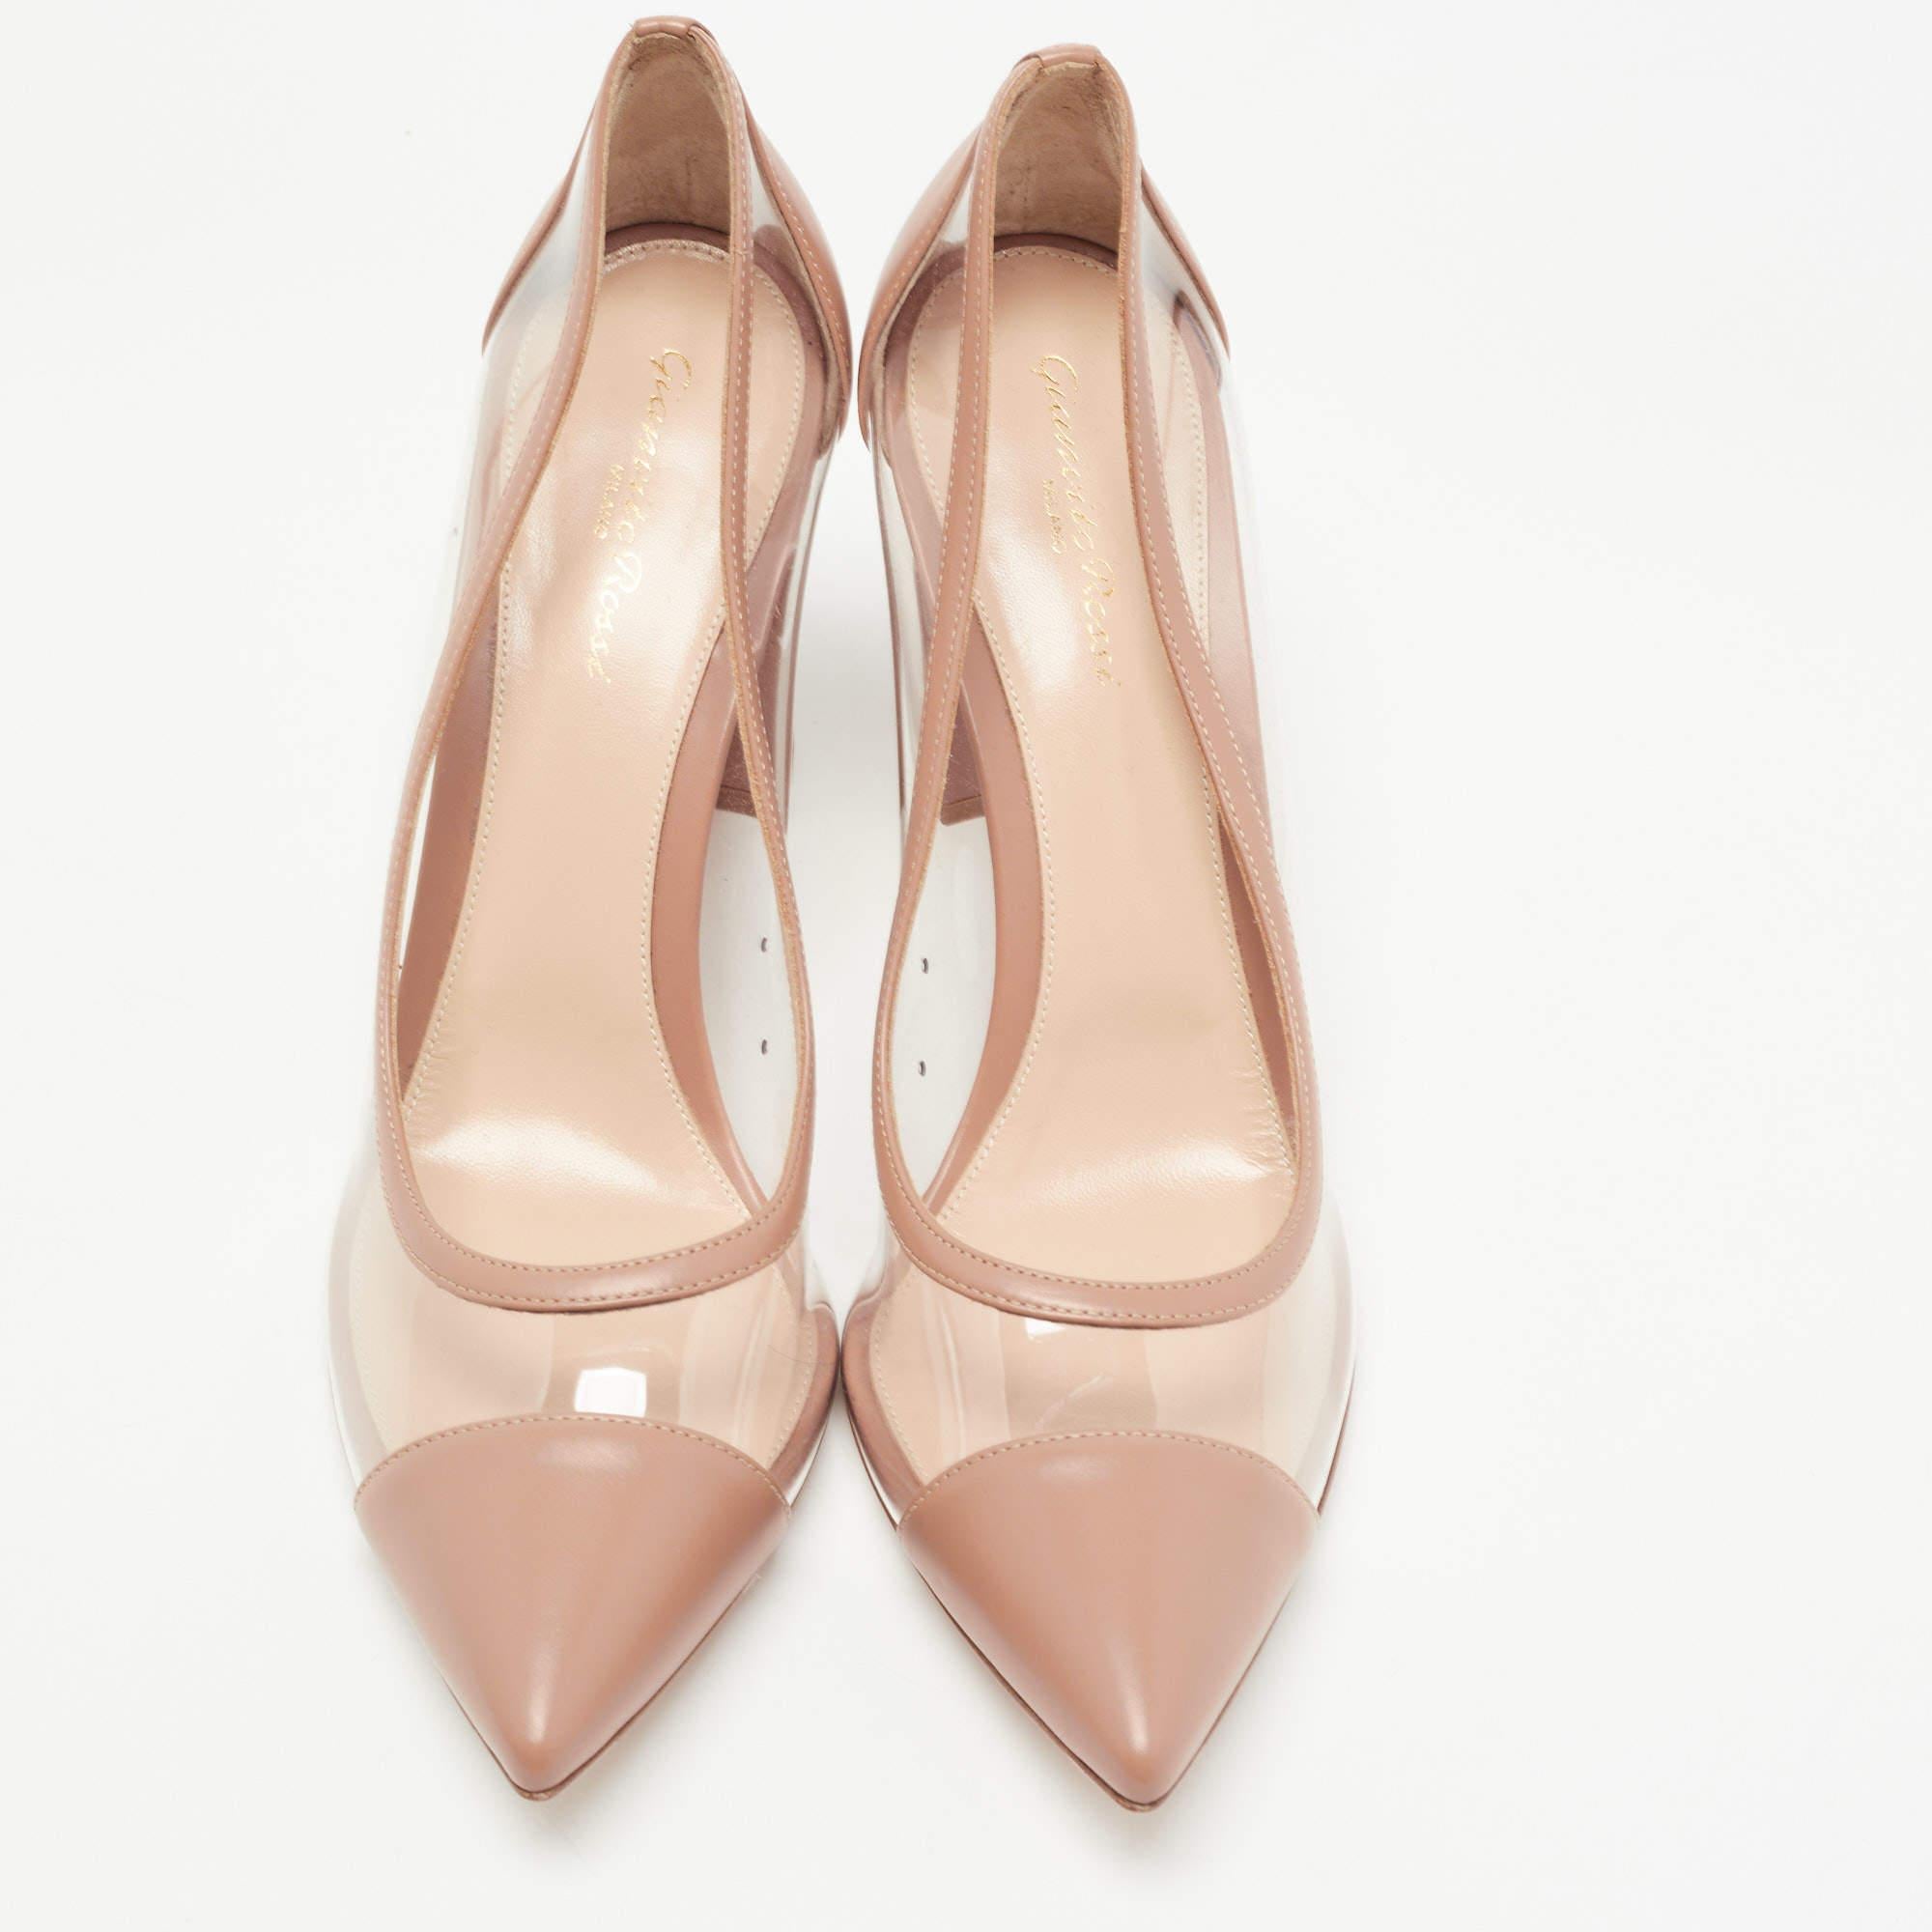 Gianvito Rossi's timeless aesthetic and stellar craftsmanship in shoemaking is evident in these stunning Plexi pumps. Crafted from nude beige patent leather on the pointed toes and heel counters, they are adorned with transparent PVC for a minimal